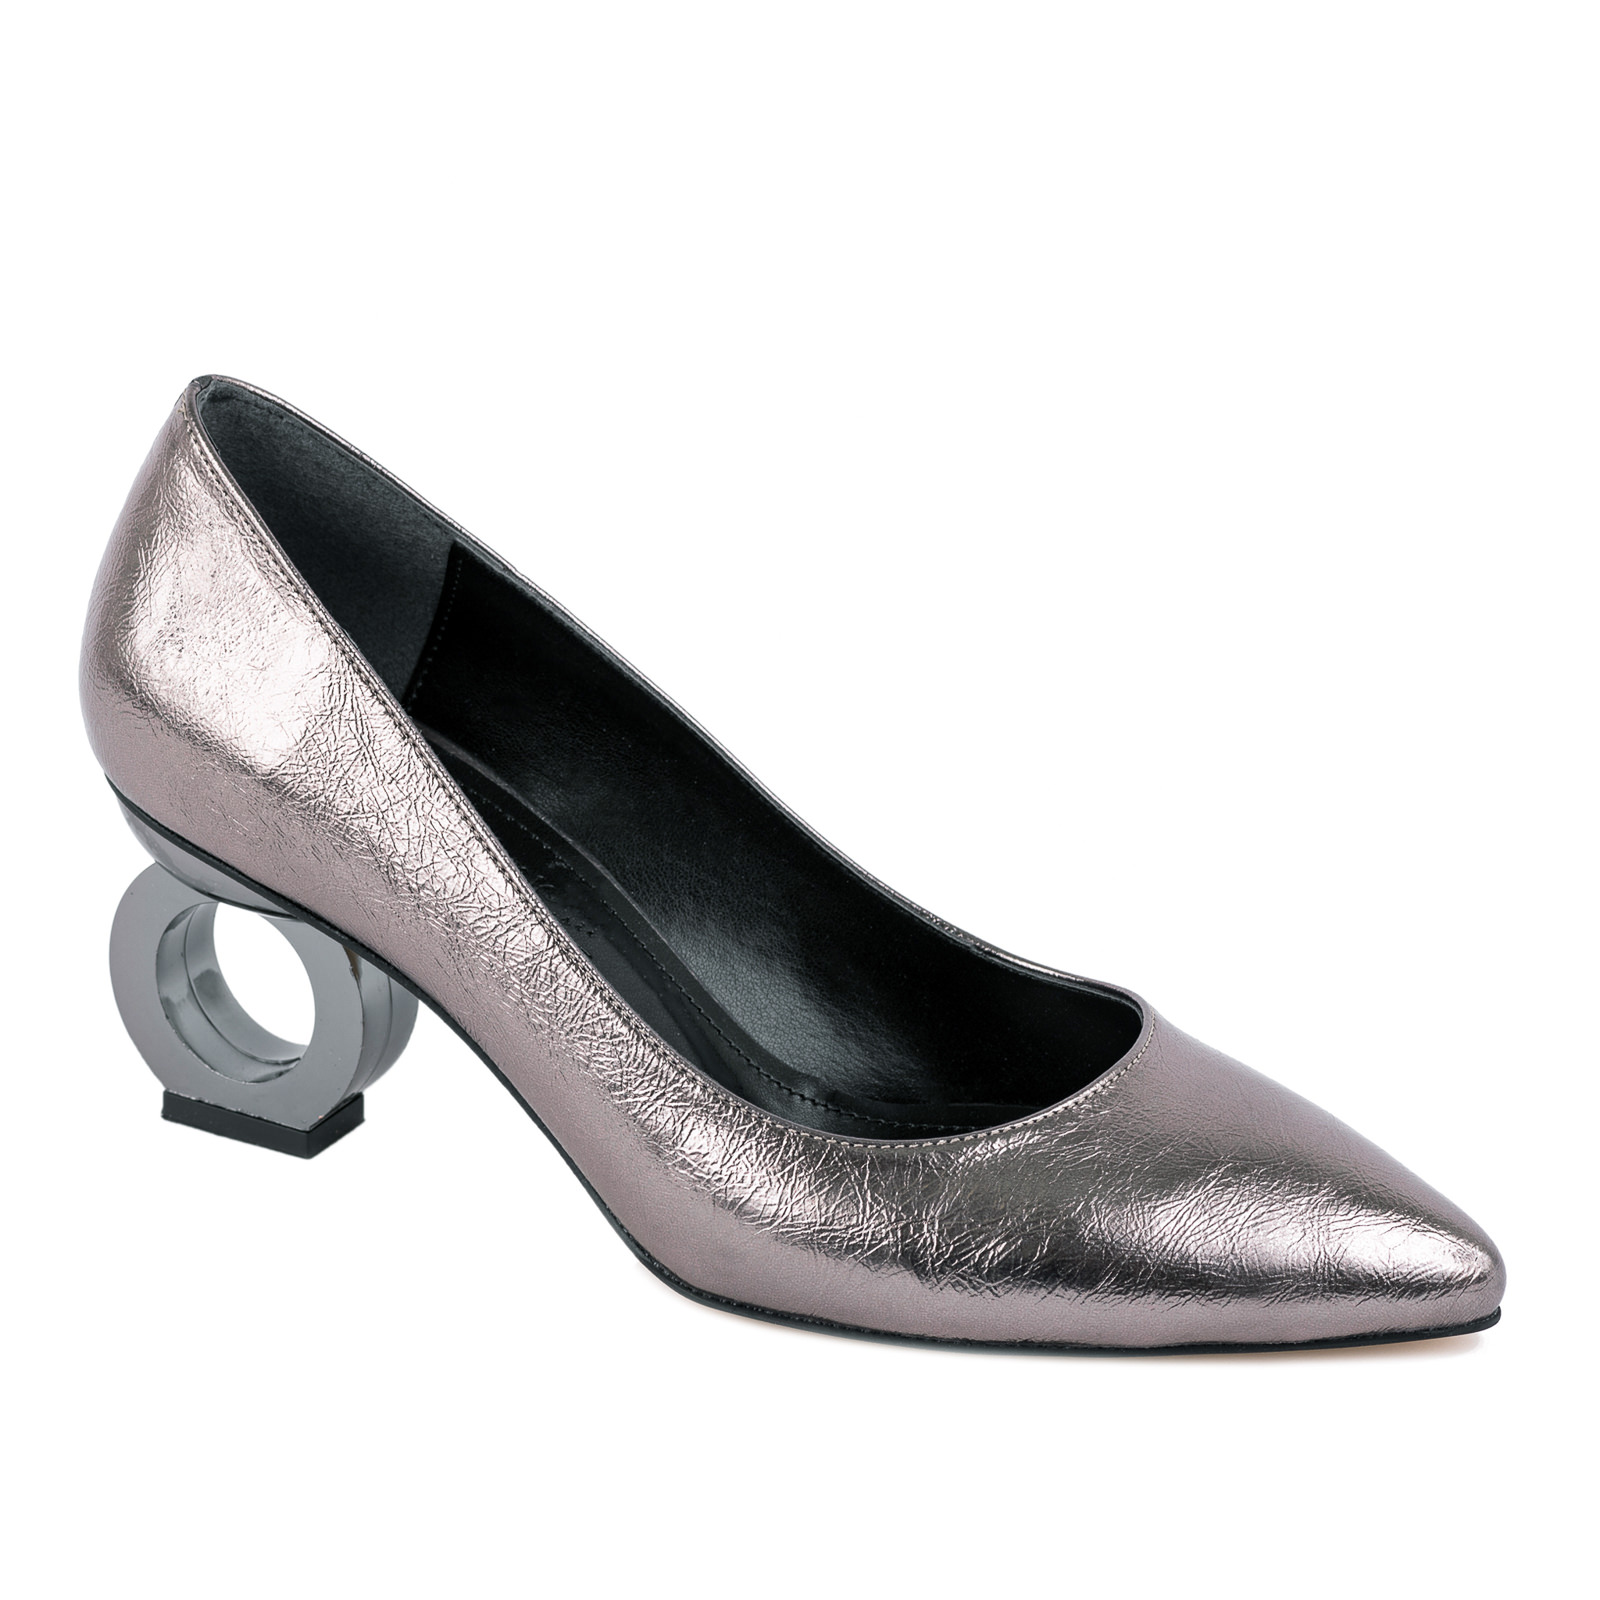 POINTED STILETTO SHOES - GRAPHITE